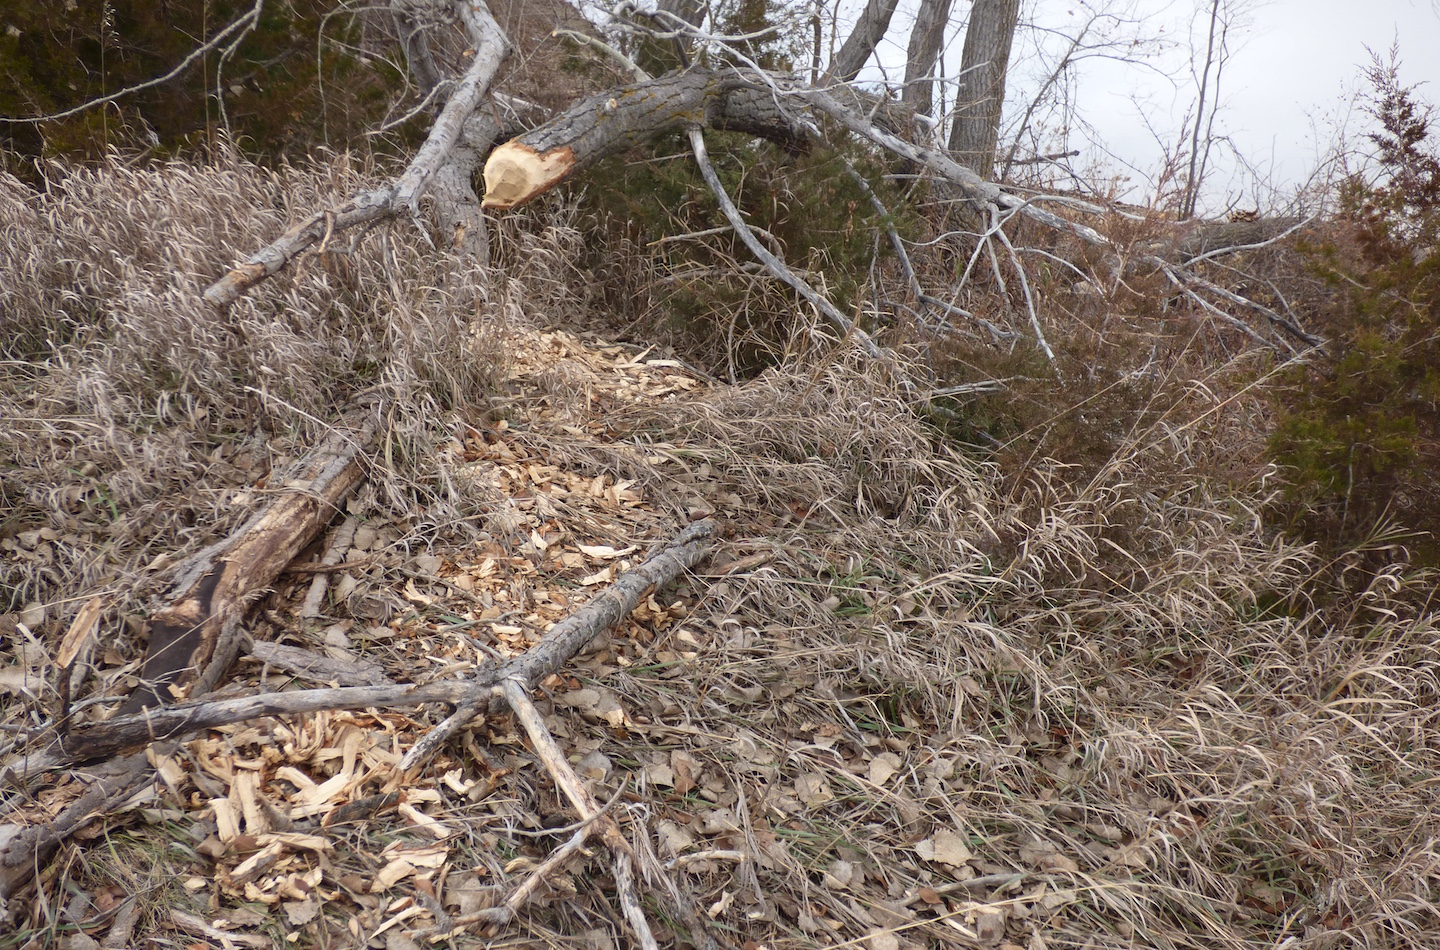 Beavers eat wood and also use tree limbs to build their dams.